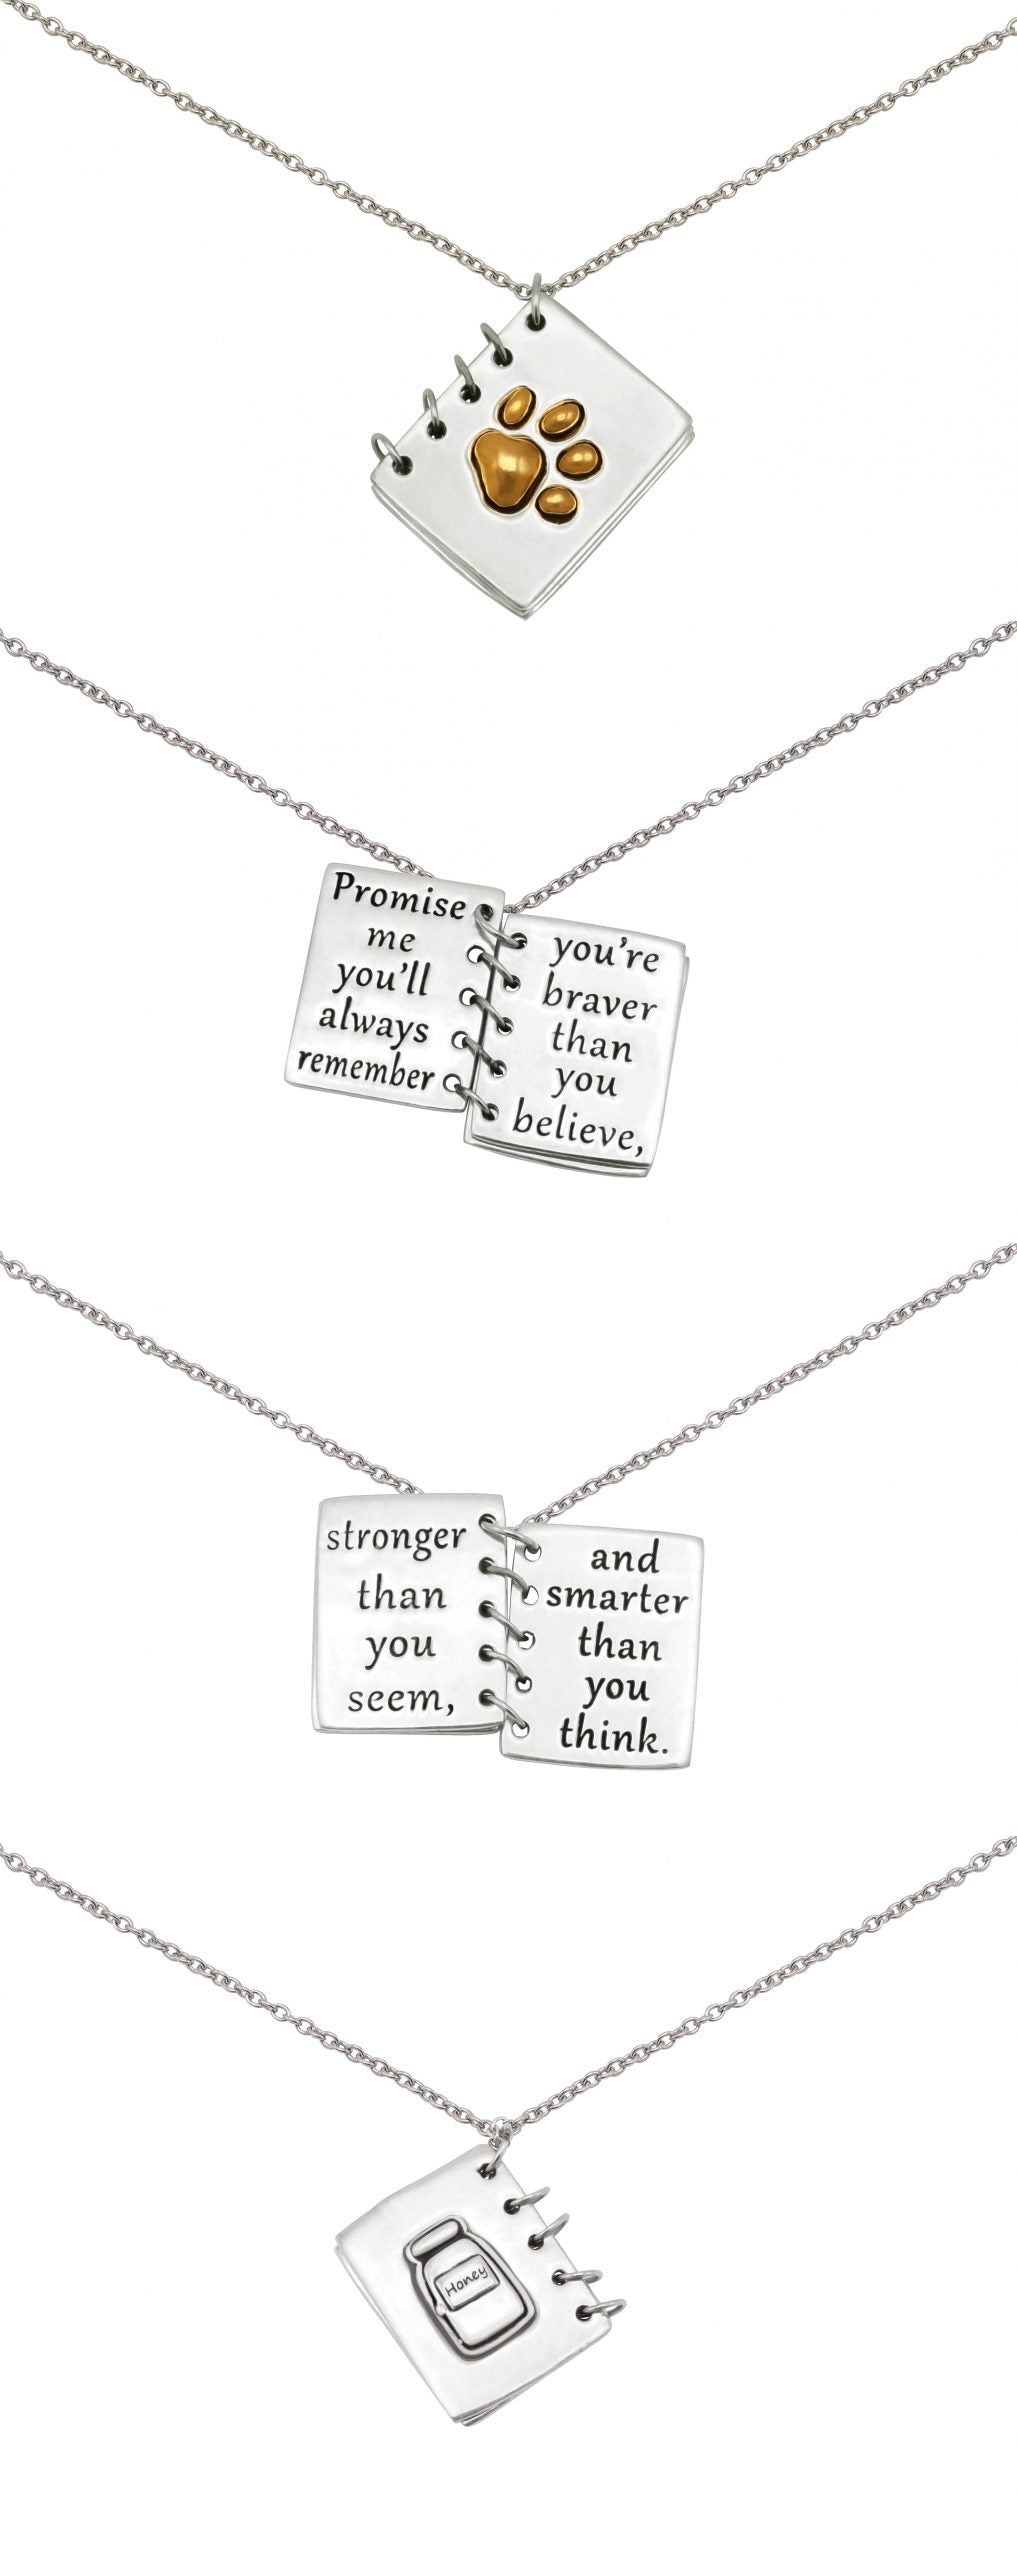 Quinnlyn & Co. Bear Claw on Book Pendant Necklace, Gifts for Women with Motivational Quote on Greeting Card